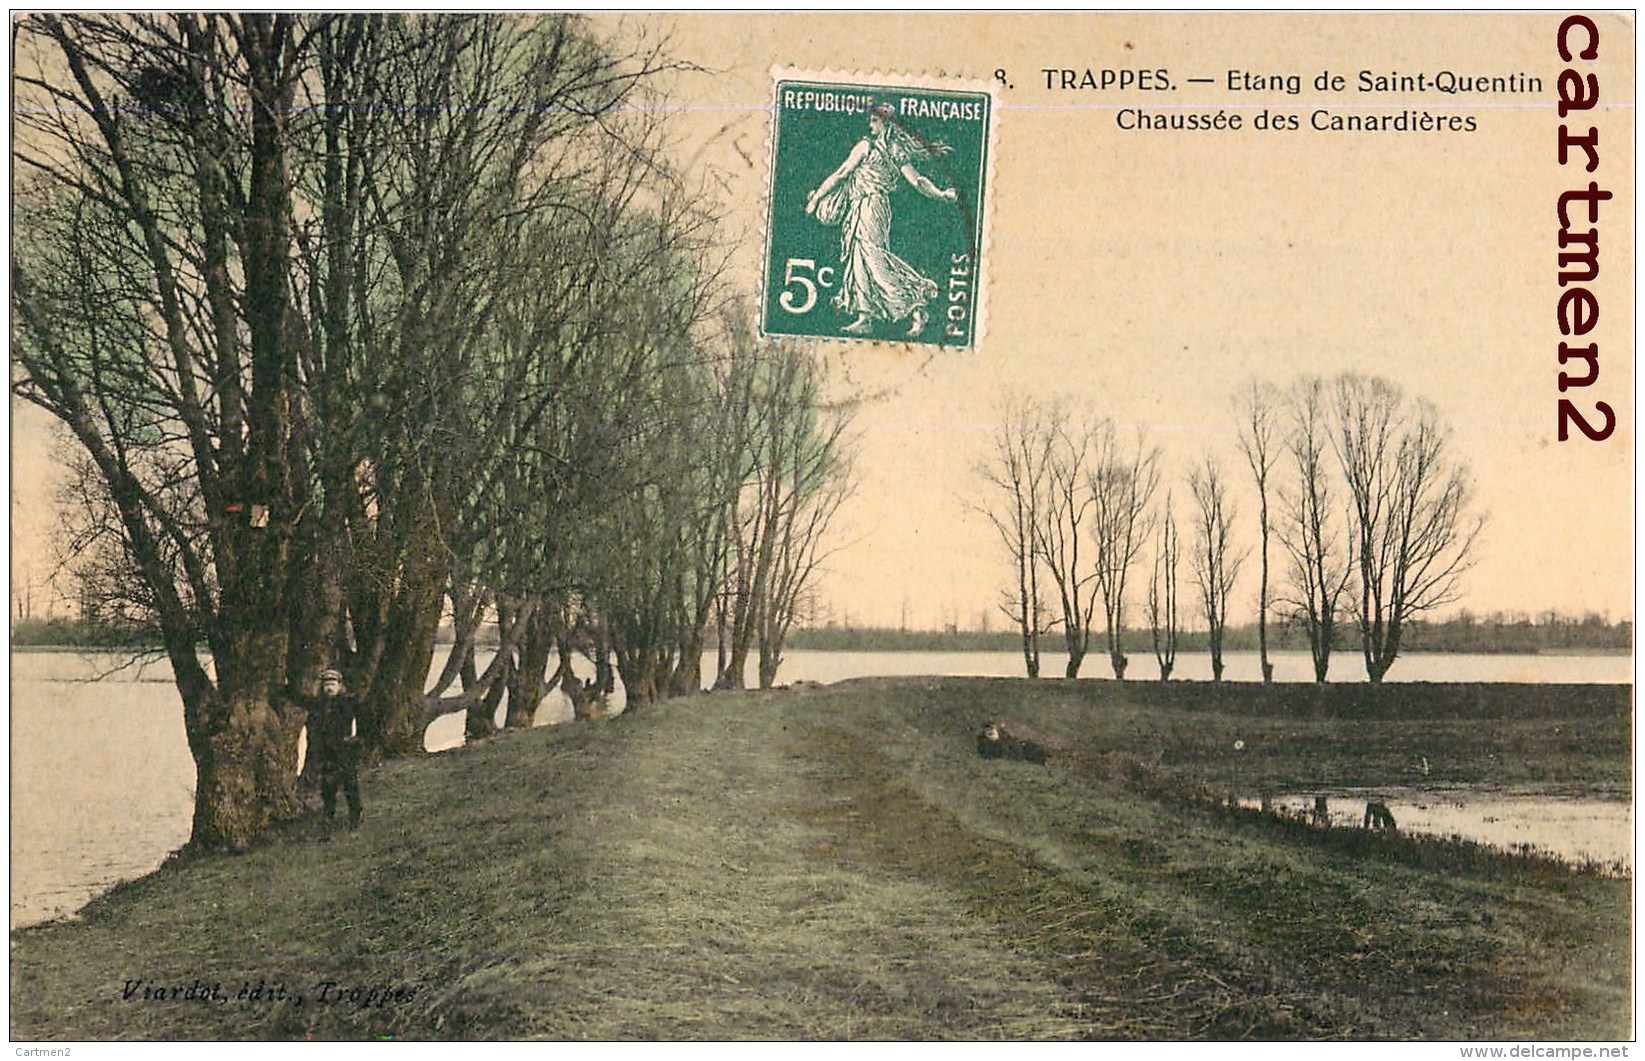 TRAPPES ETANG DE SAINT-QUENTIN CHAUSSEE DES CANARDIERES 78 YVELINES - Trappes